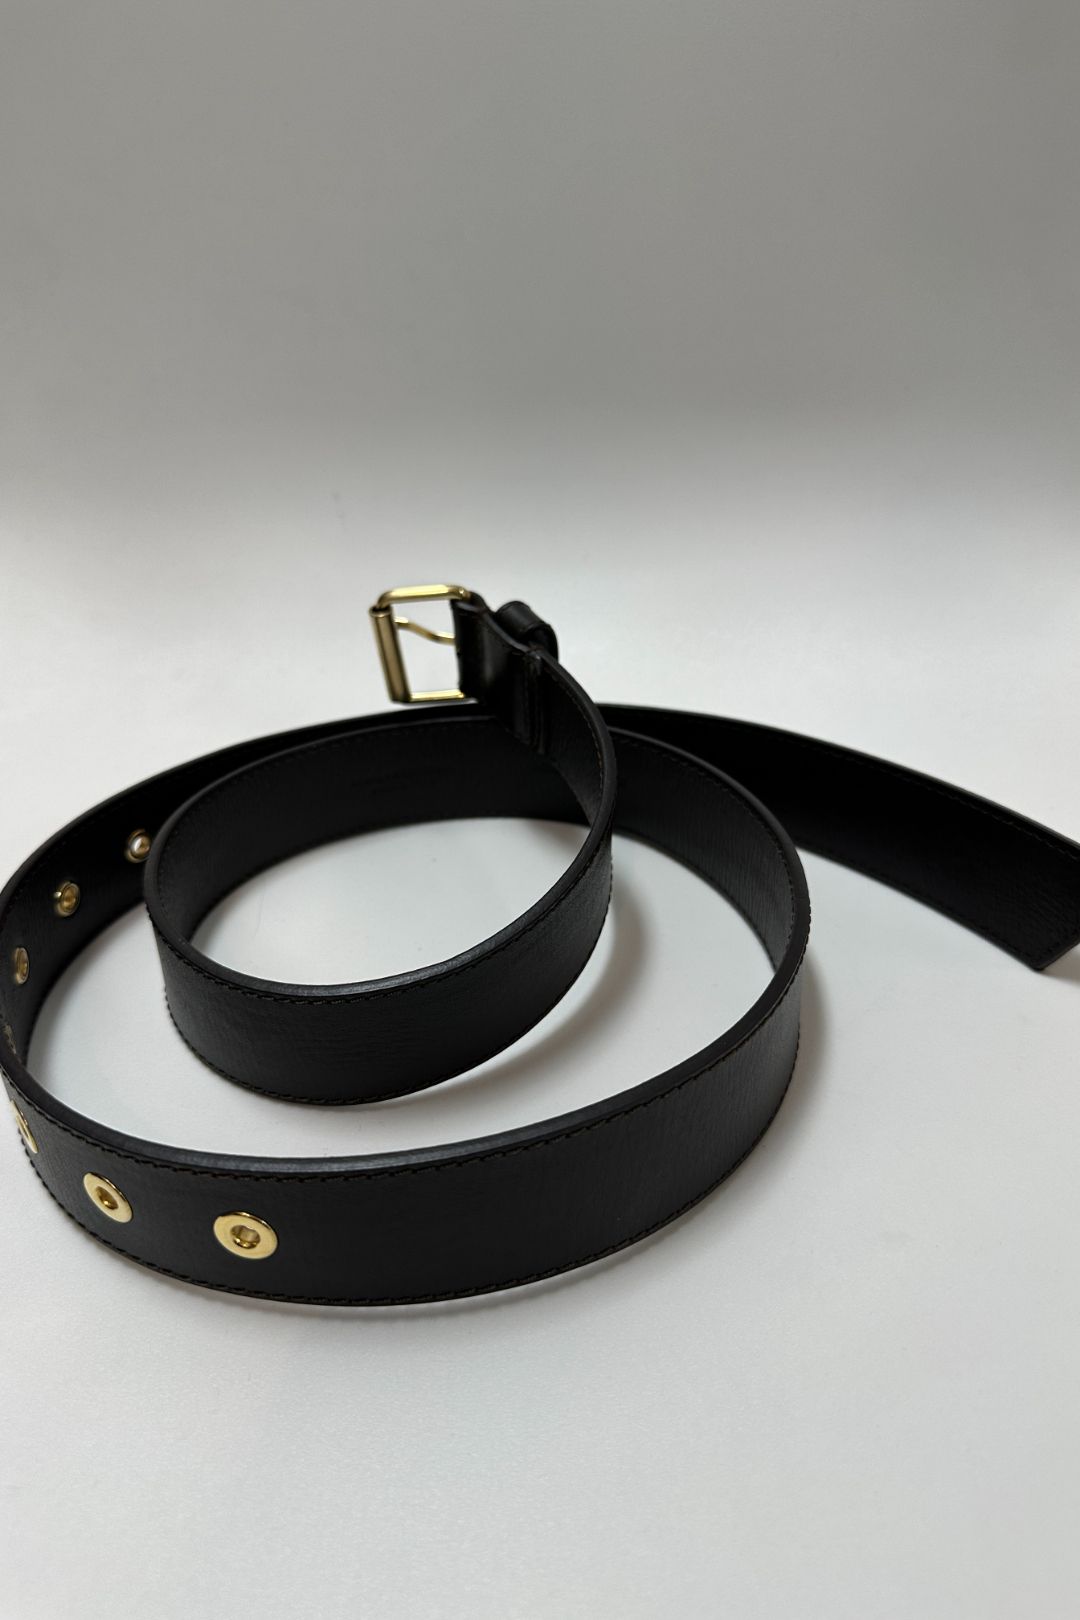 Scanlan Theodore Brown Leather Belt with Gold tone Grommets